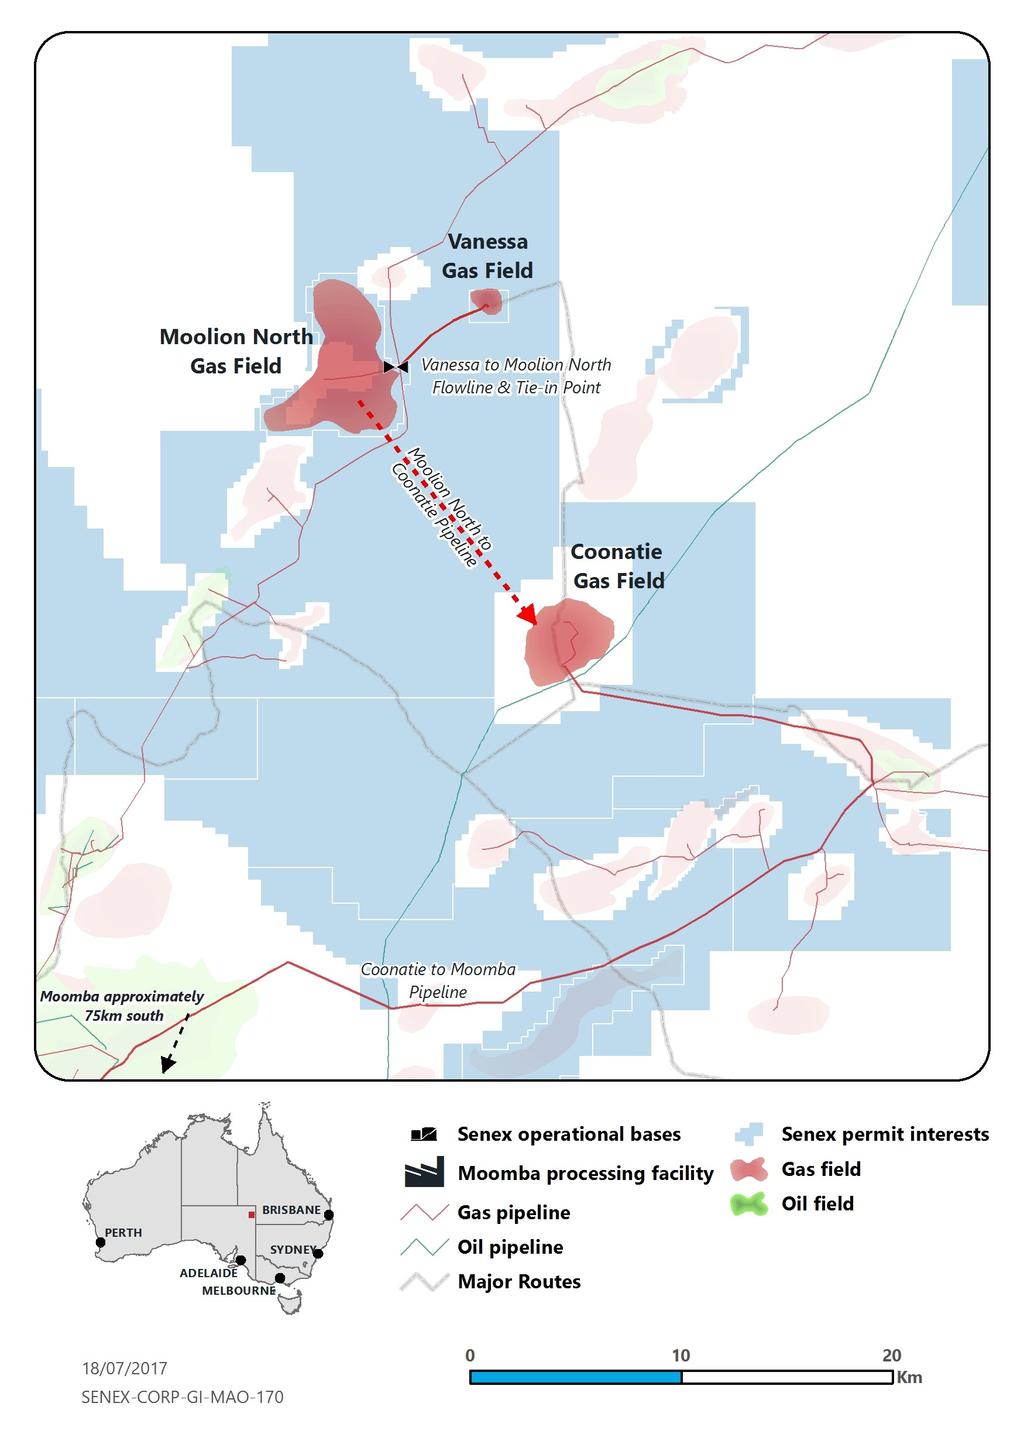 ly Report COOPER BASIN GAS Vanessa gas field During the quarter, Senex completed engineering work to deliver gas from the Vanessa field during FY18 The PEL 182 joint venture (Senex 57% and operator)